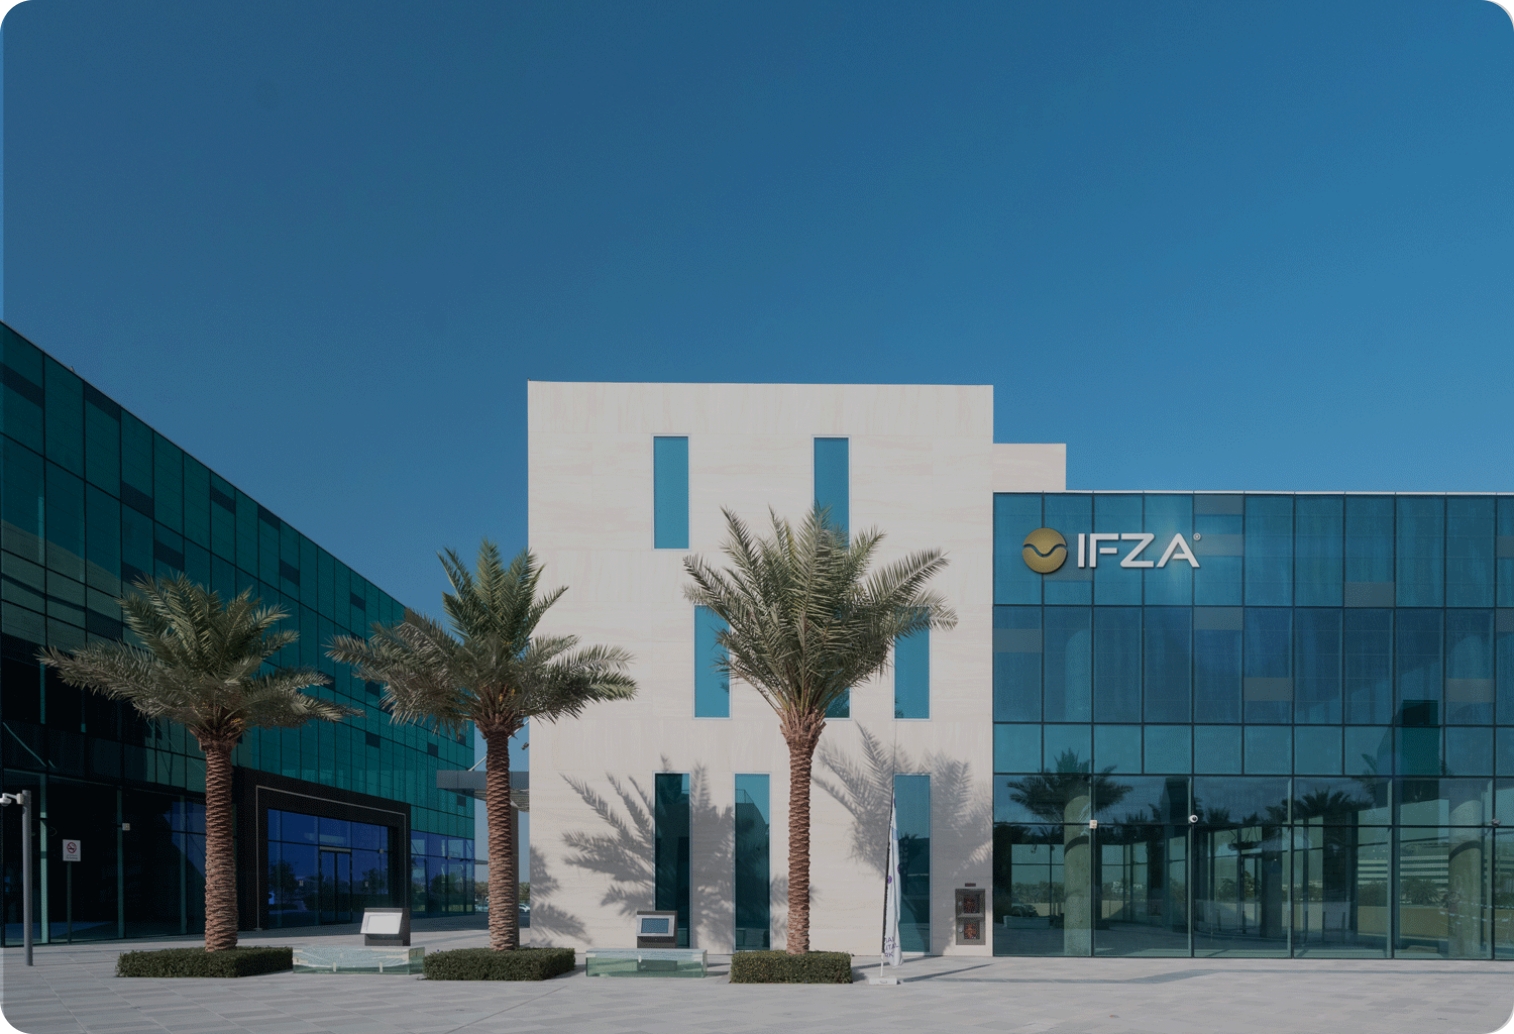 Get Your Business Up And Running With An IFZA License